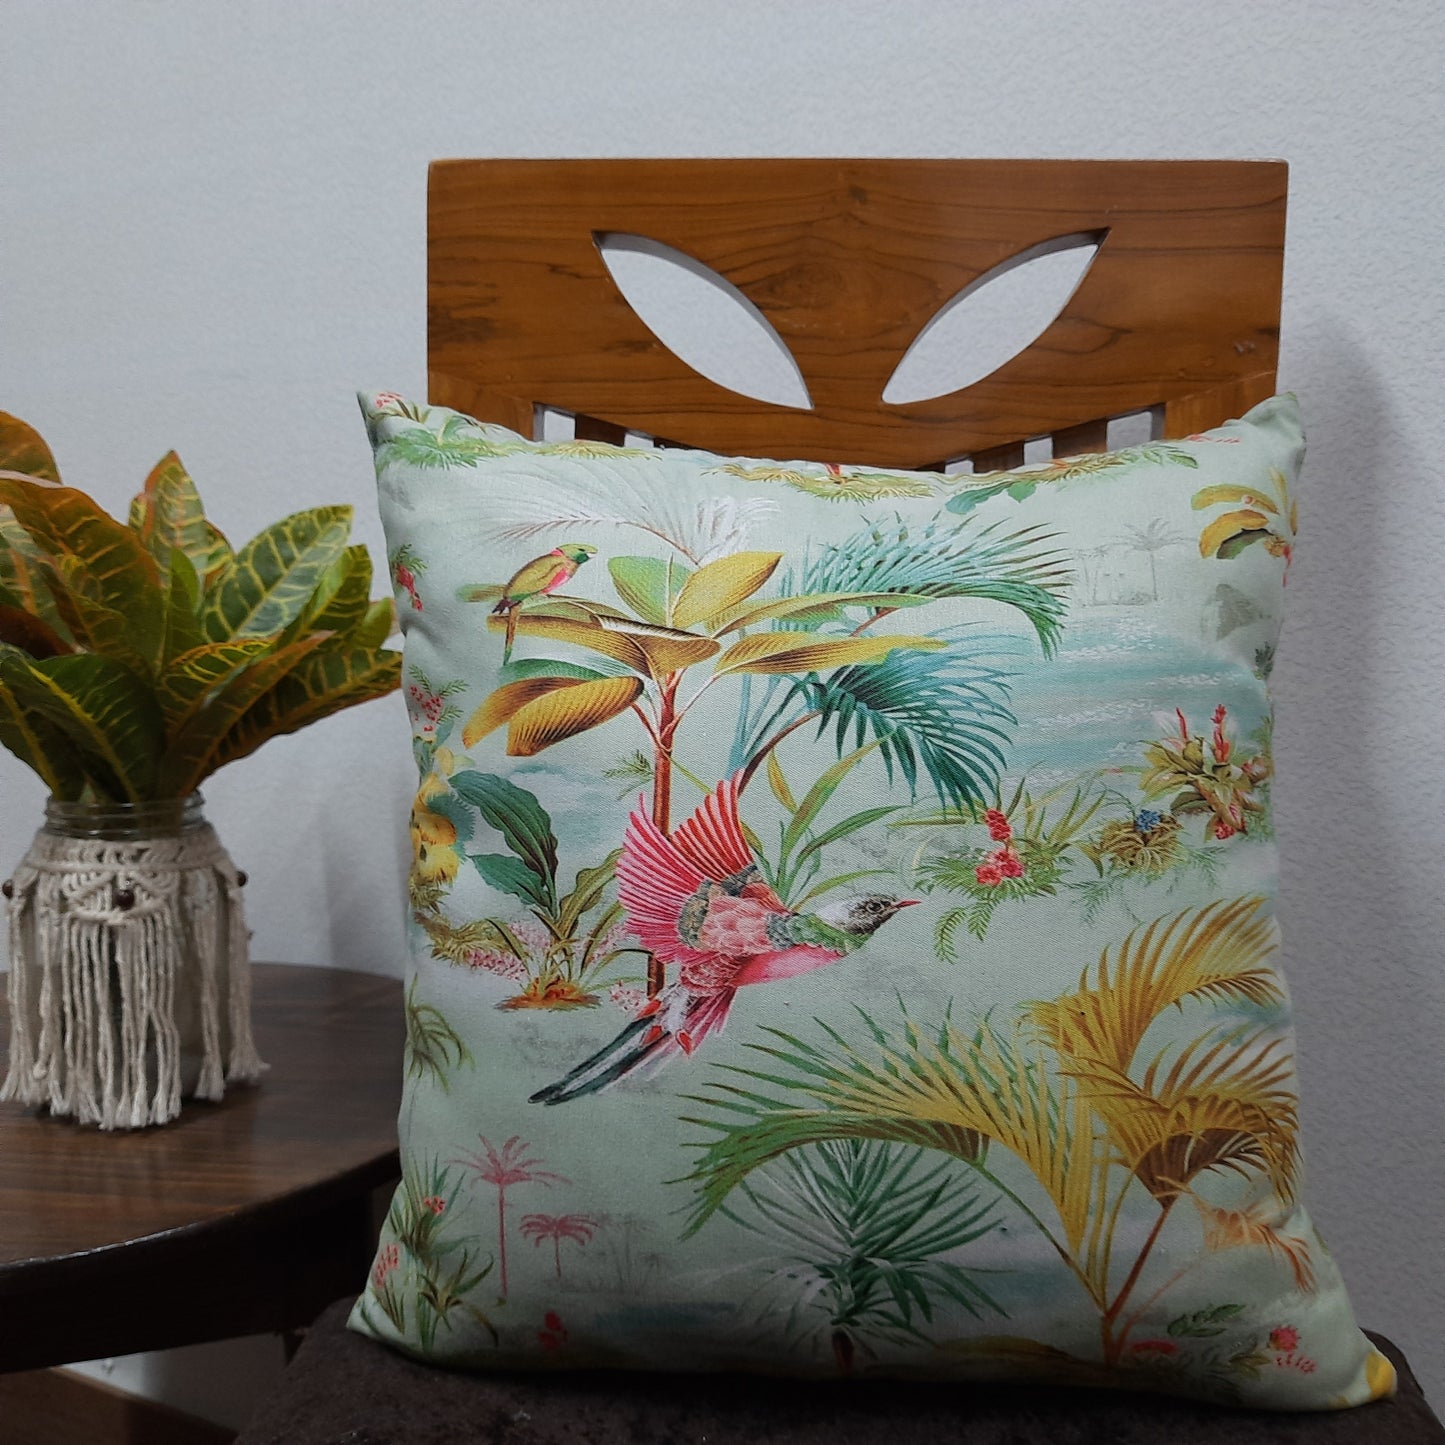 Riviera Collection-Cushion Covers In Glace Cotton For Regular Use –Bird With Flowers – Best Price 40cm x 40cm (~16″ x 16″) – Set of 5